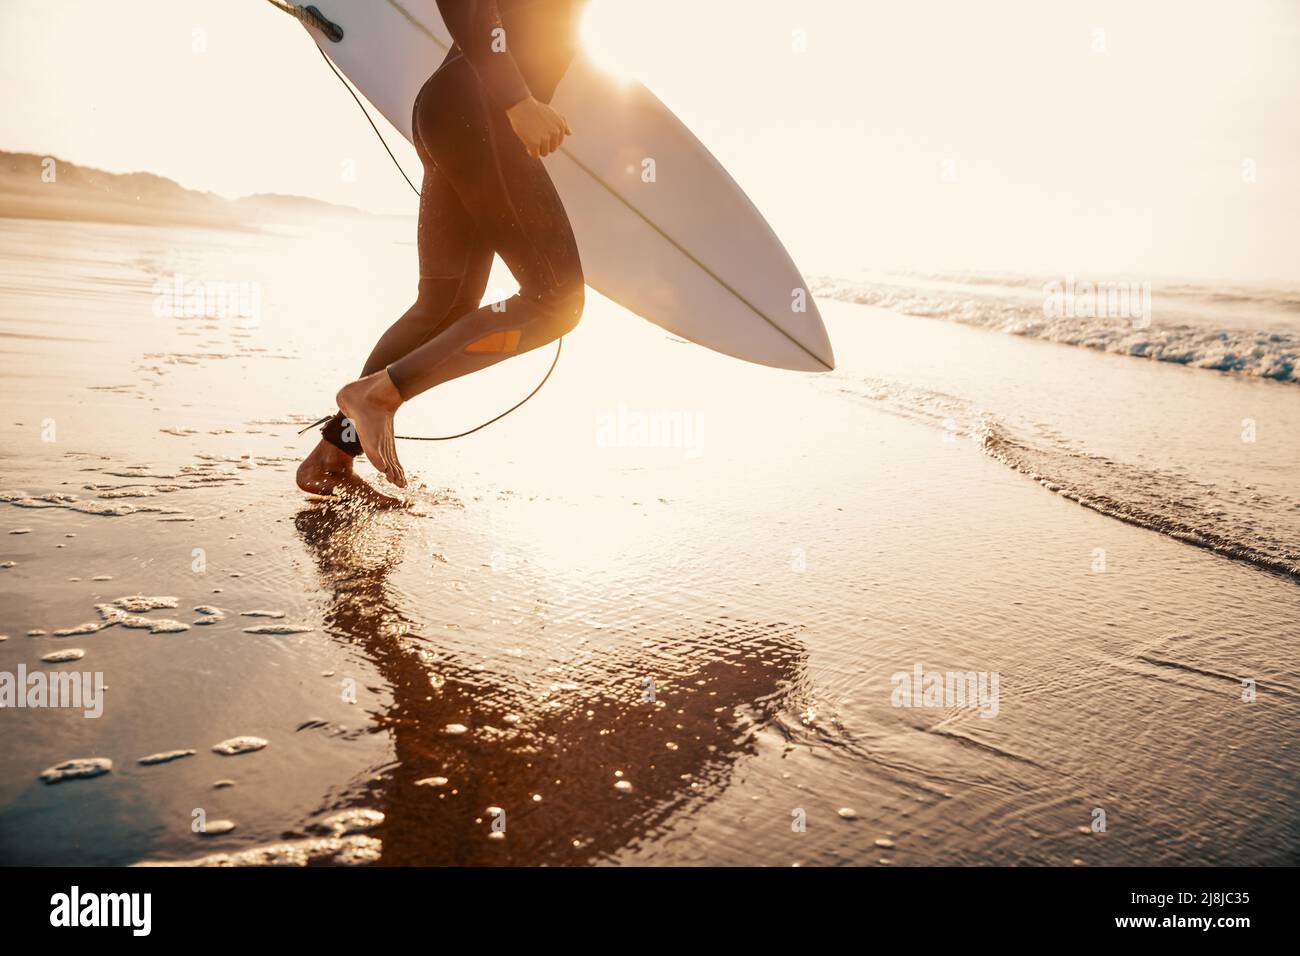 A surfer with his surfboard running to the waves Stock Photo